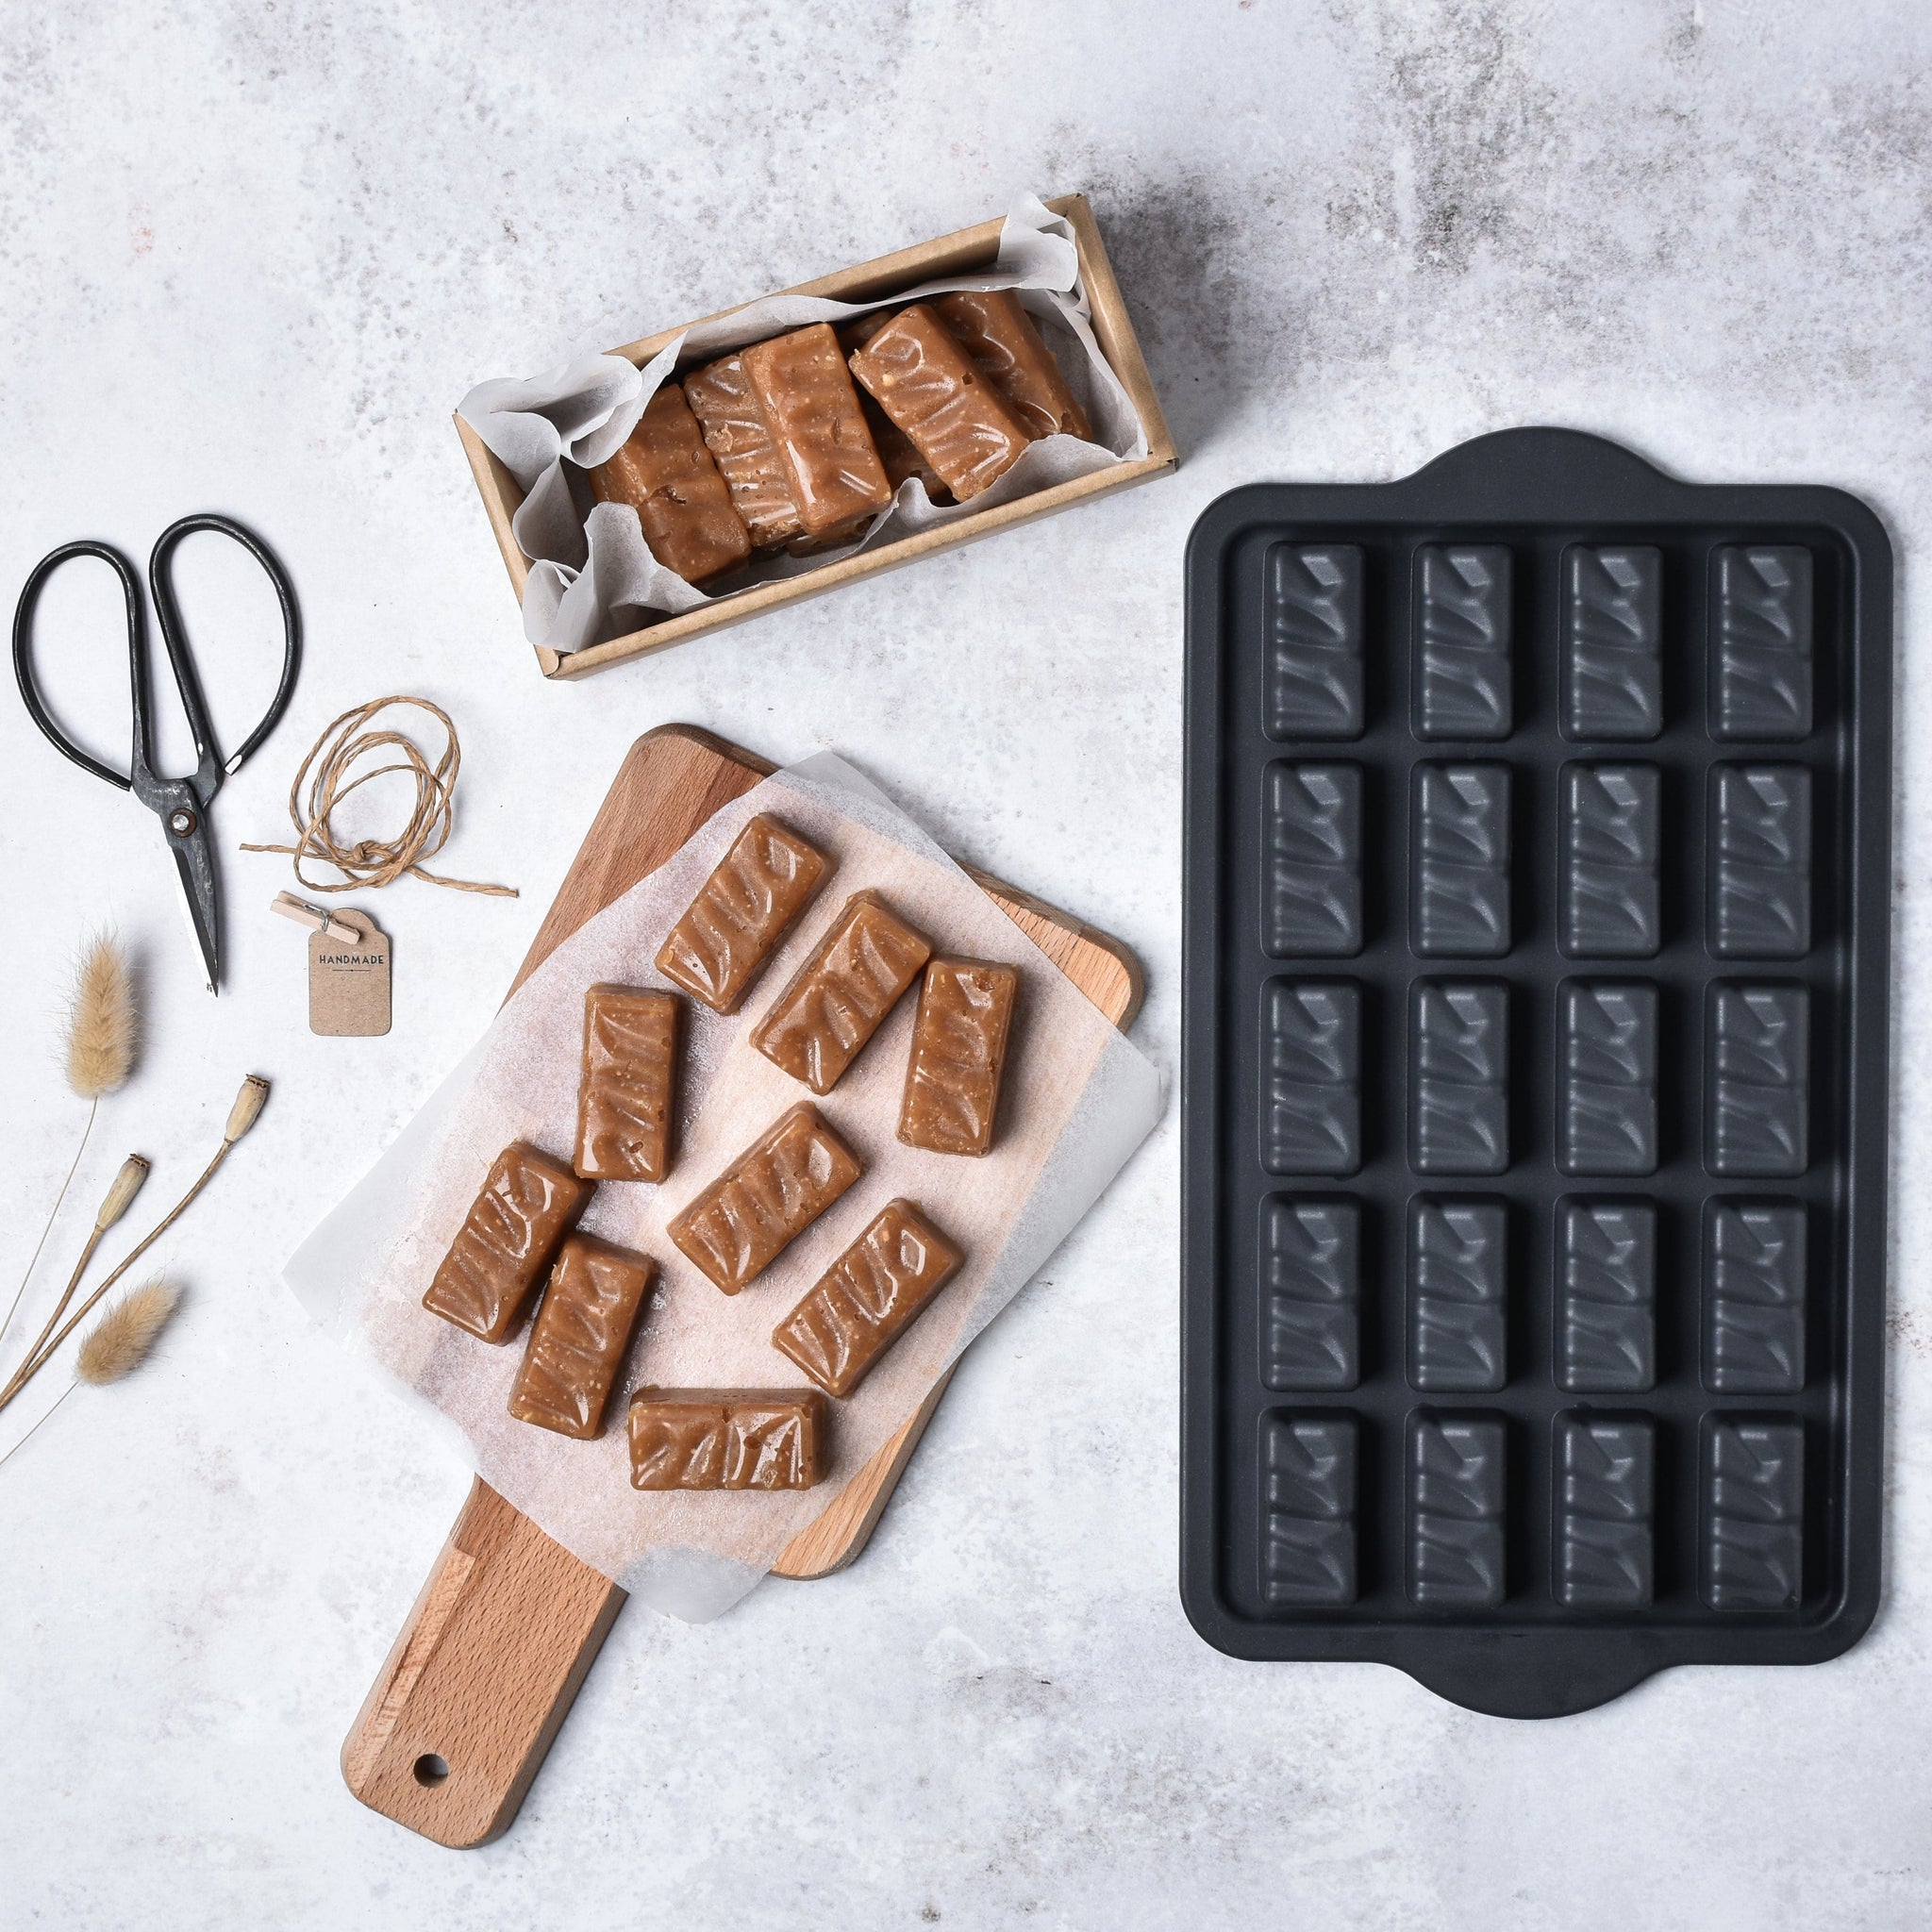 Thermomix-New-Zealand TheMix Shop Chocolate Mini Mould Accessories